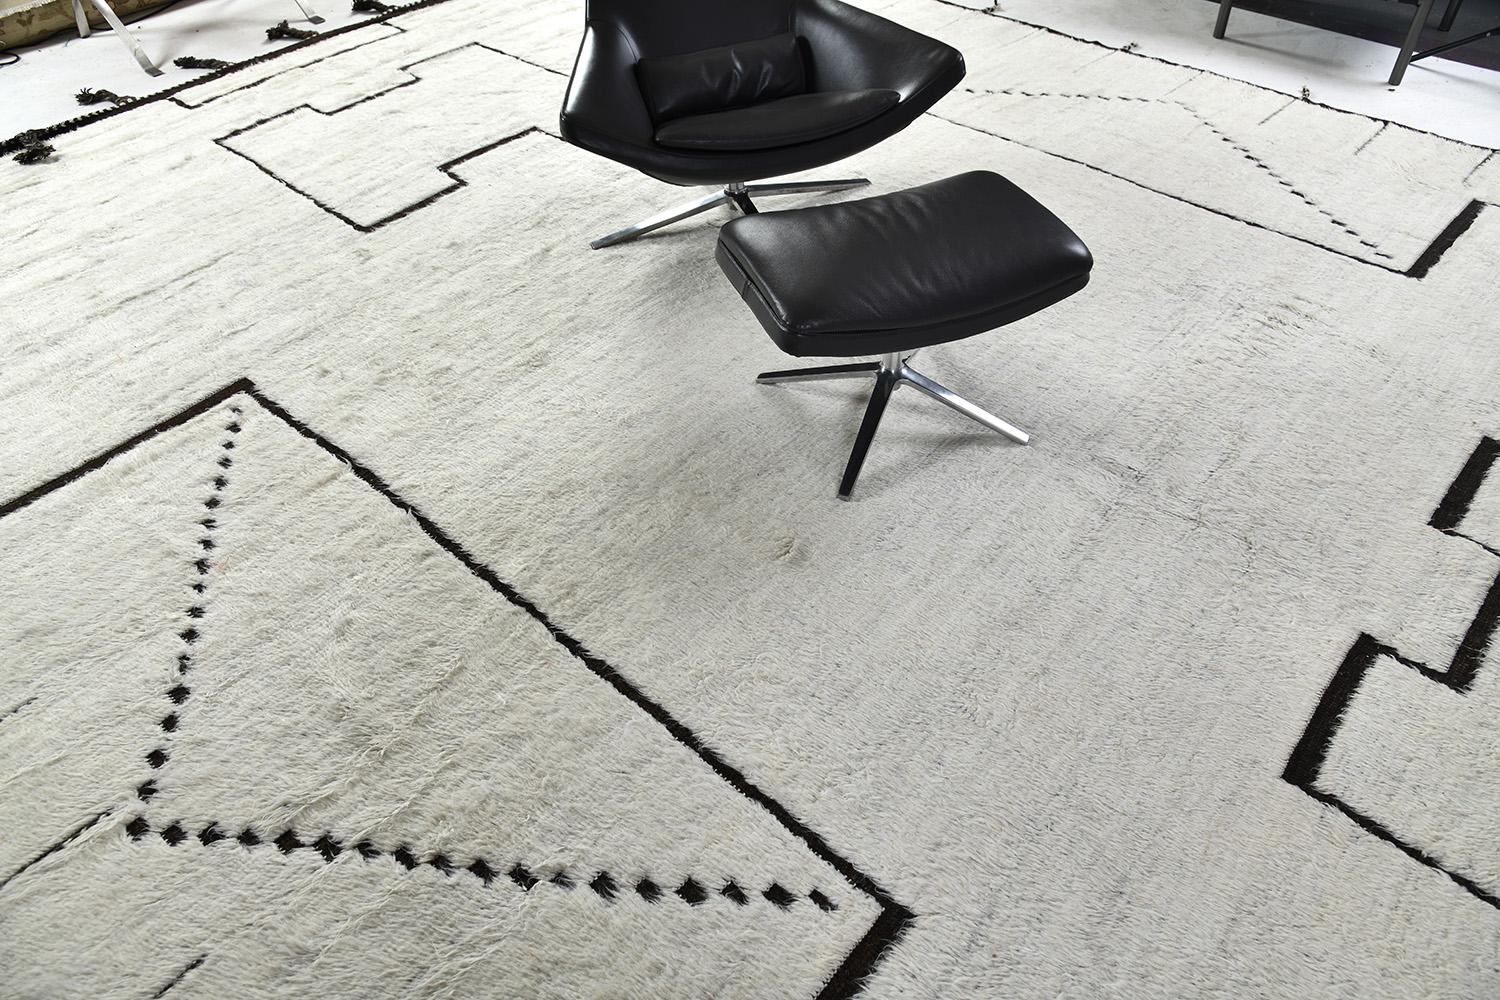 Sharqi’ features cozy colour palette and wonderfully soft pile. Waves of abrash between tranquil shades of ivory and brown statements give dimension and added visual interest to the understated yet impactful. This versatile transitional rug would